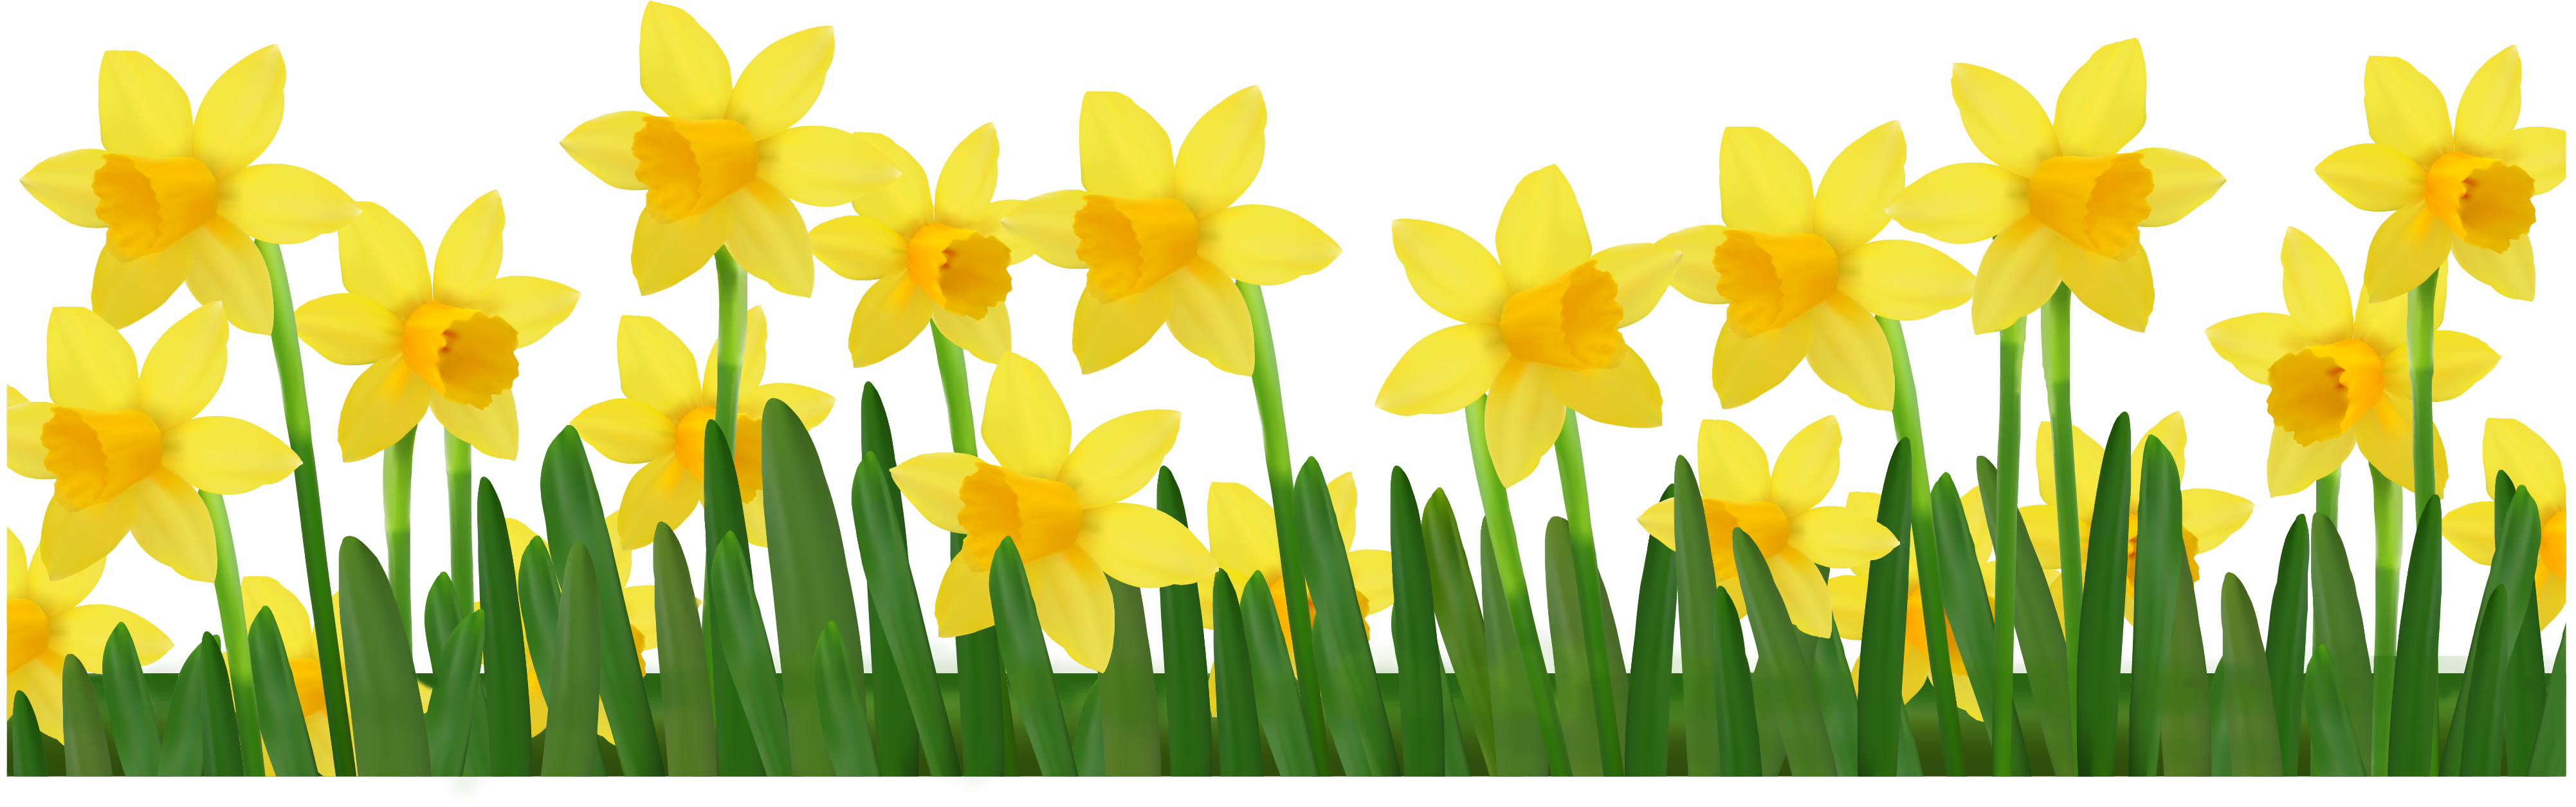 Spring Flowers In Pots - Daffodils Png (4200x1283)